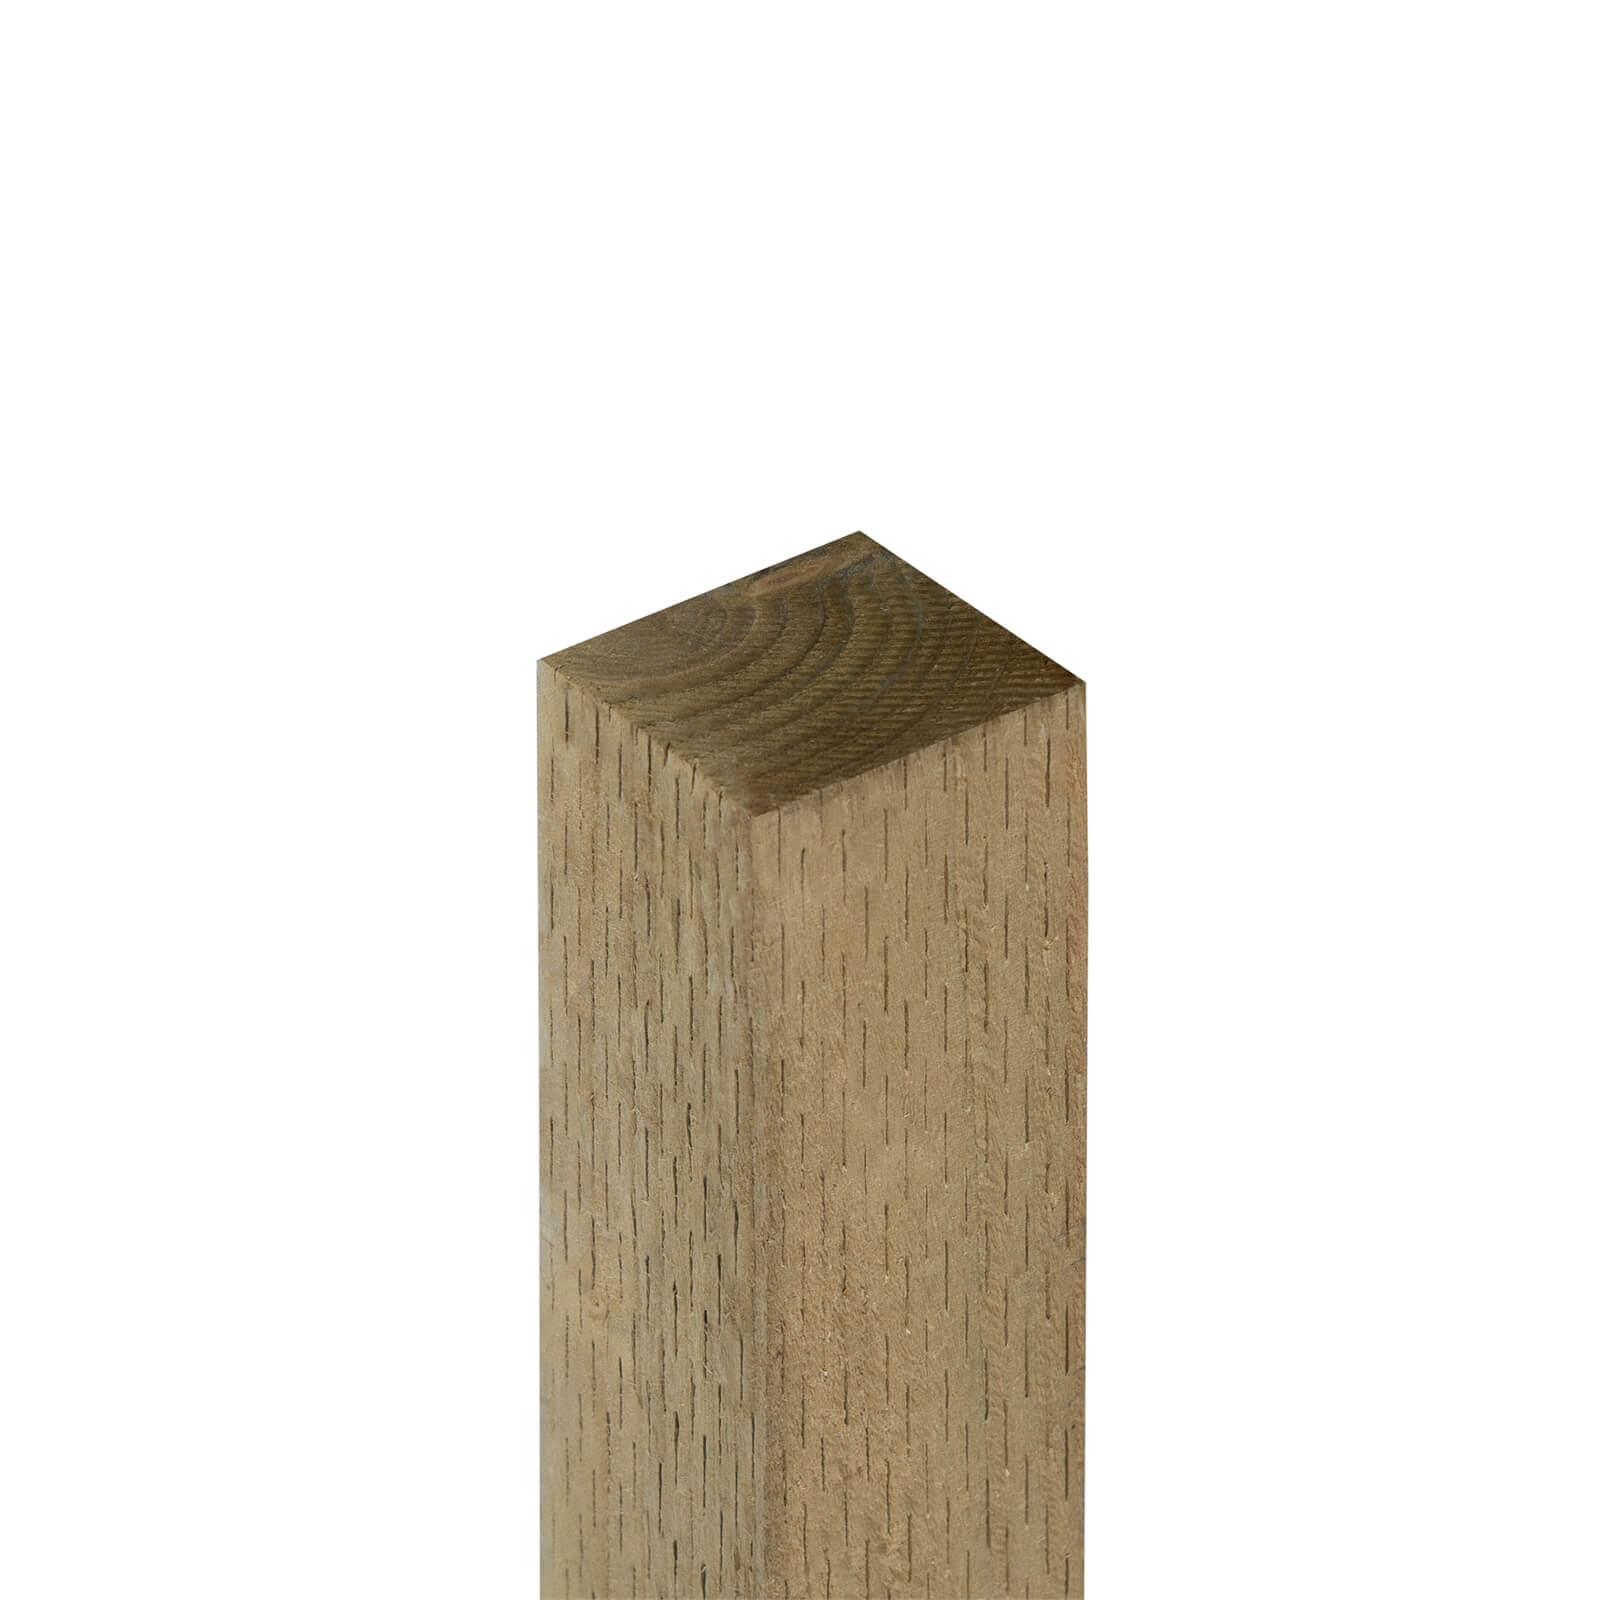 Green Incised Fence Post 2.4m (2400 x 75 x 75mm) - Pack of 6